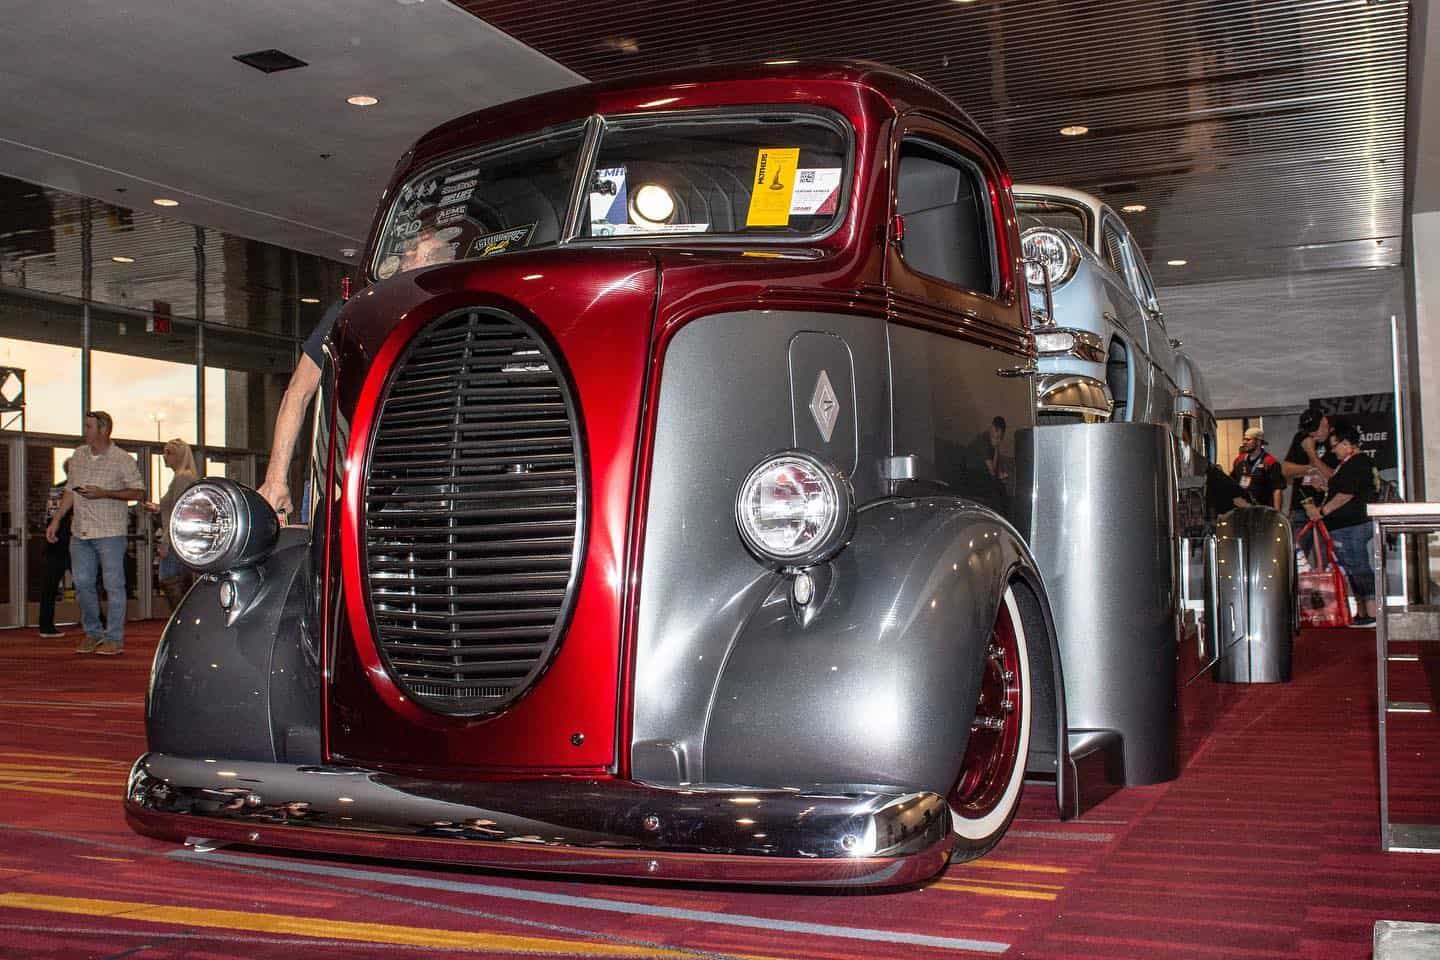 1941 Ford COE Custom Hauler by Popeye's Rod Shop at SEMA. Photo - The Transmission on Facebook